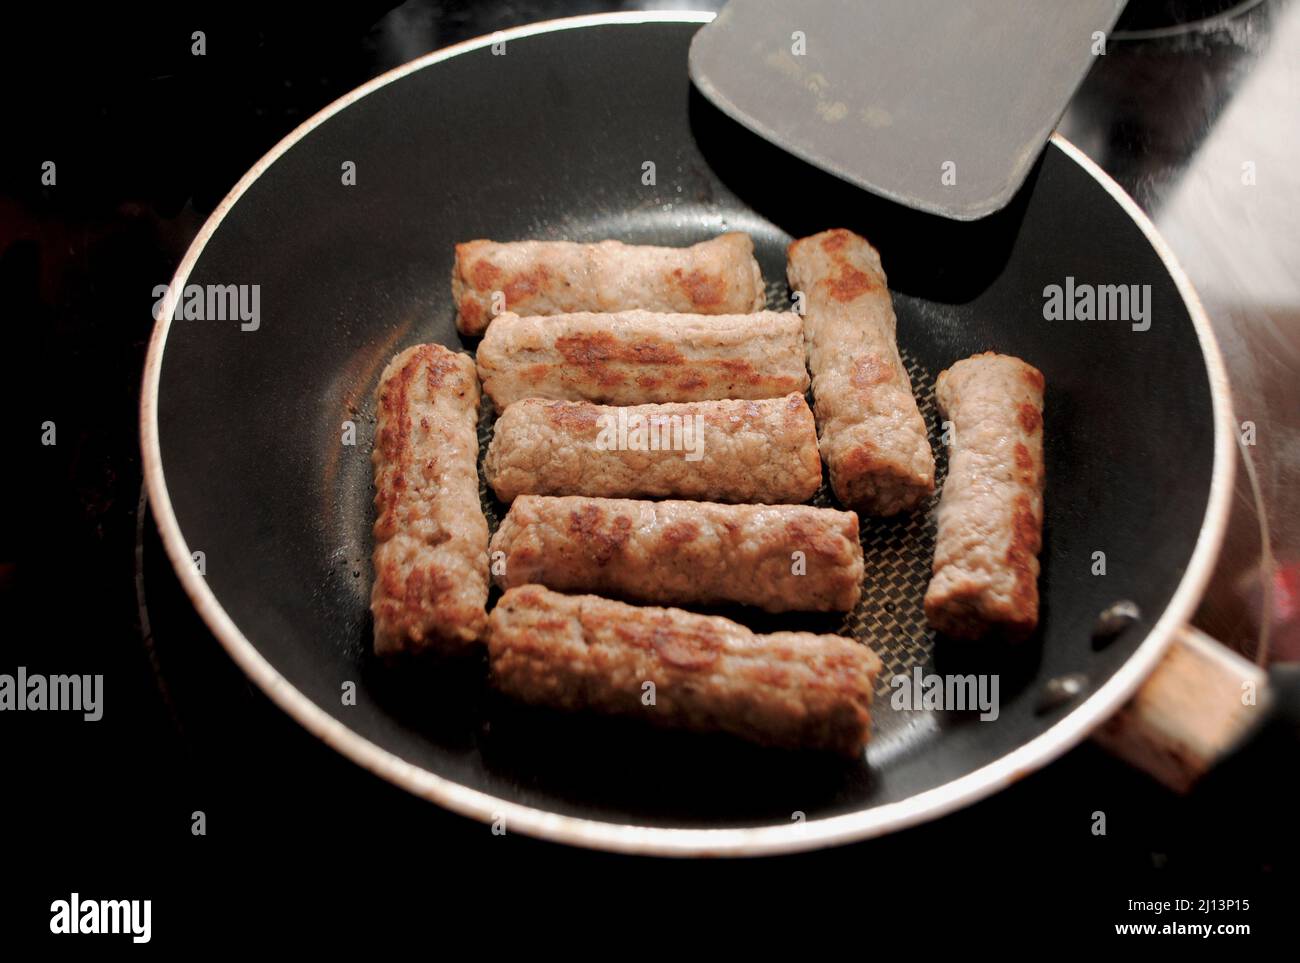 Breakfast Sausage Links Frying in a Pan Stock Photo